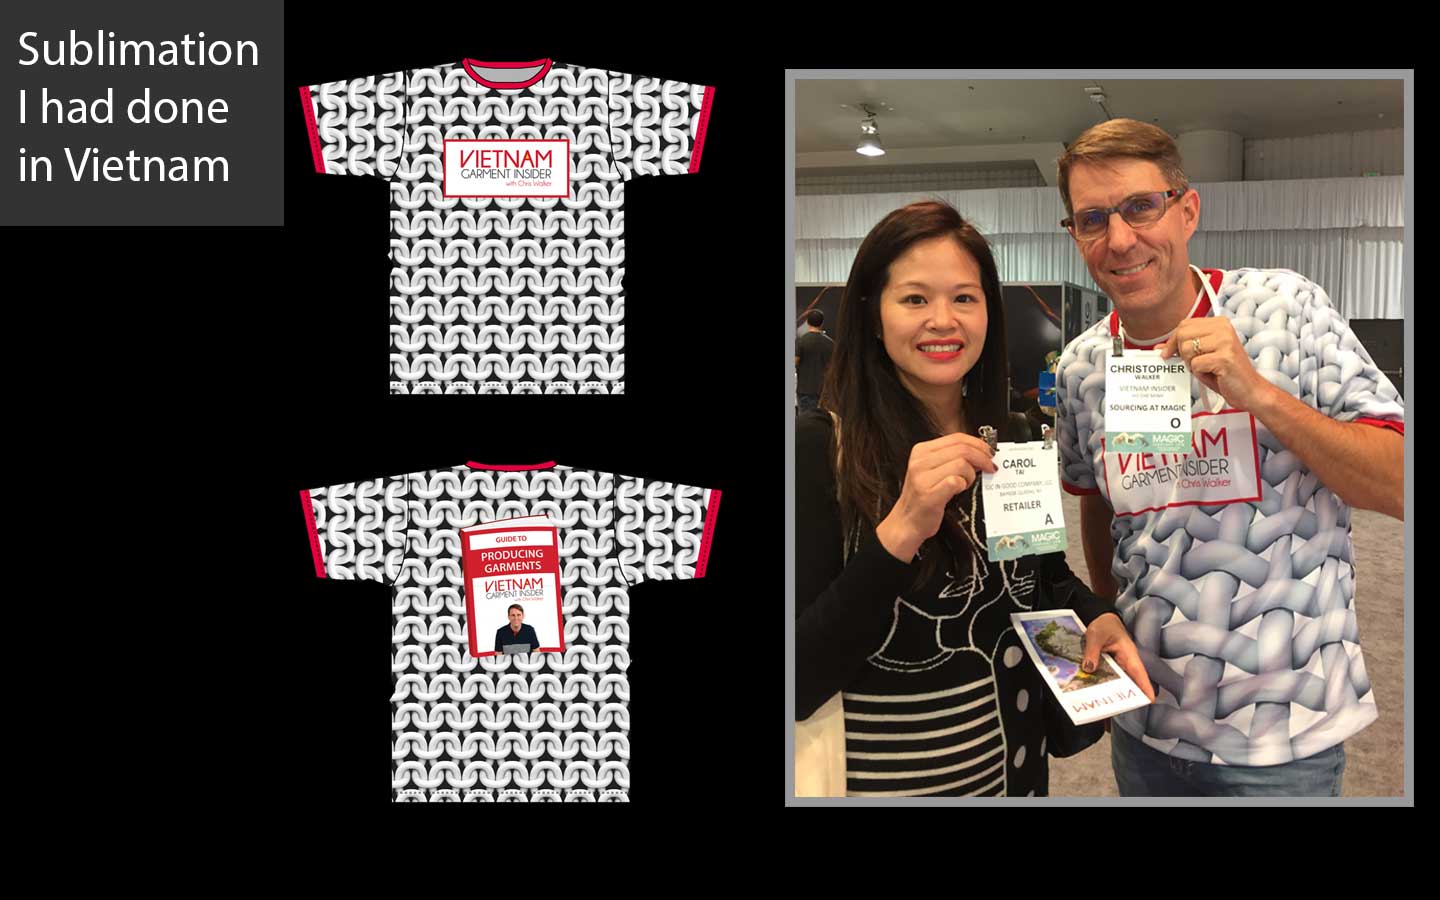 Chris knows sublimation printing in Vietnam